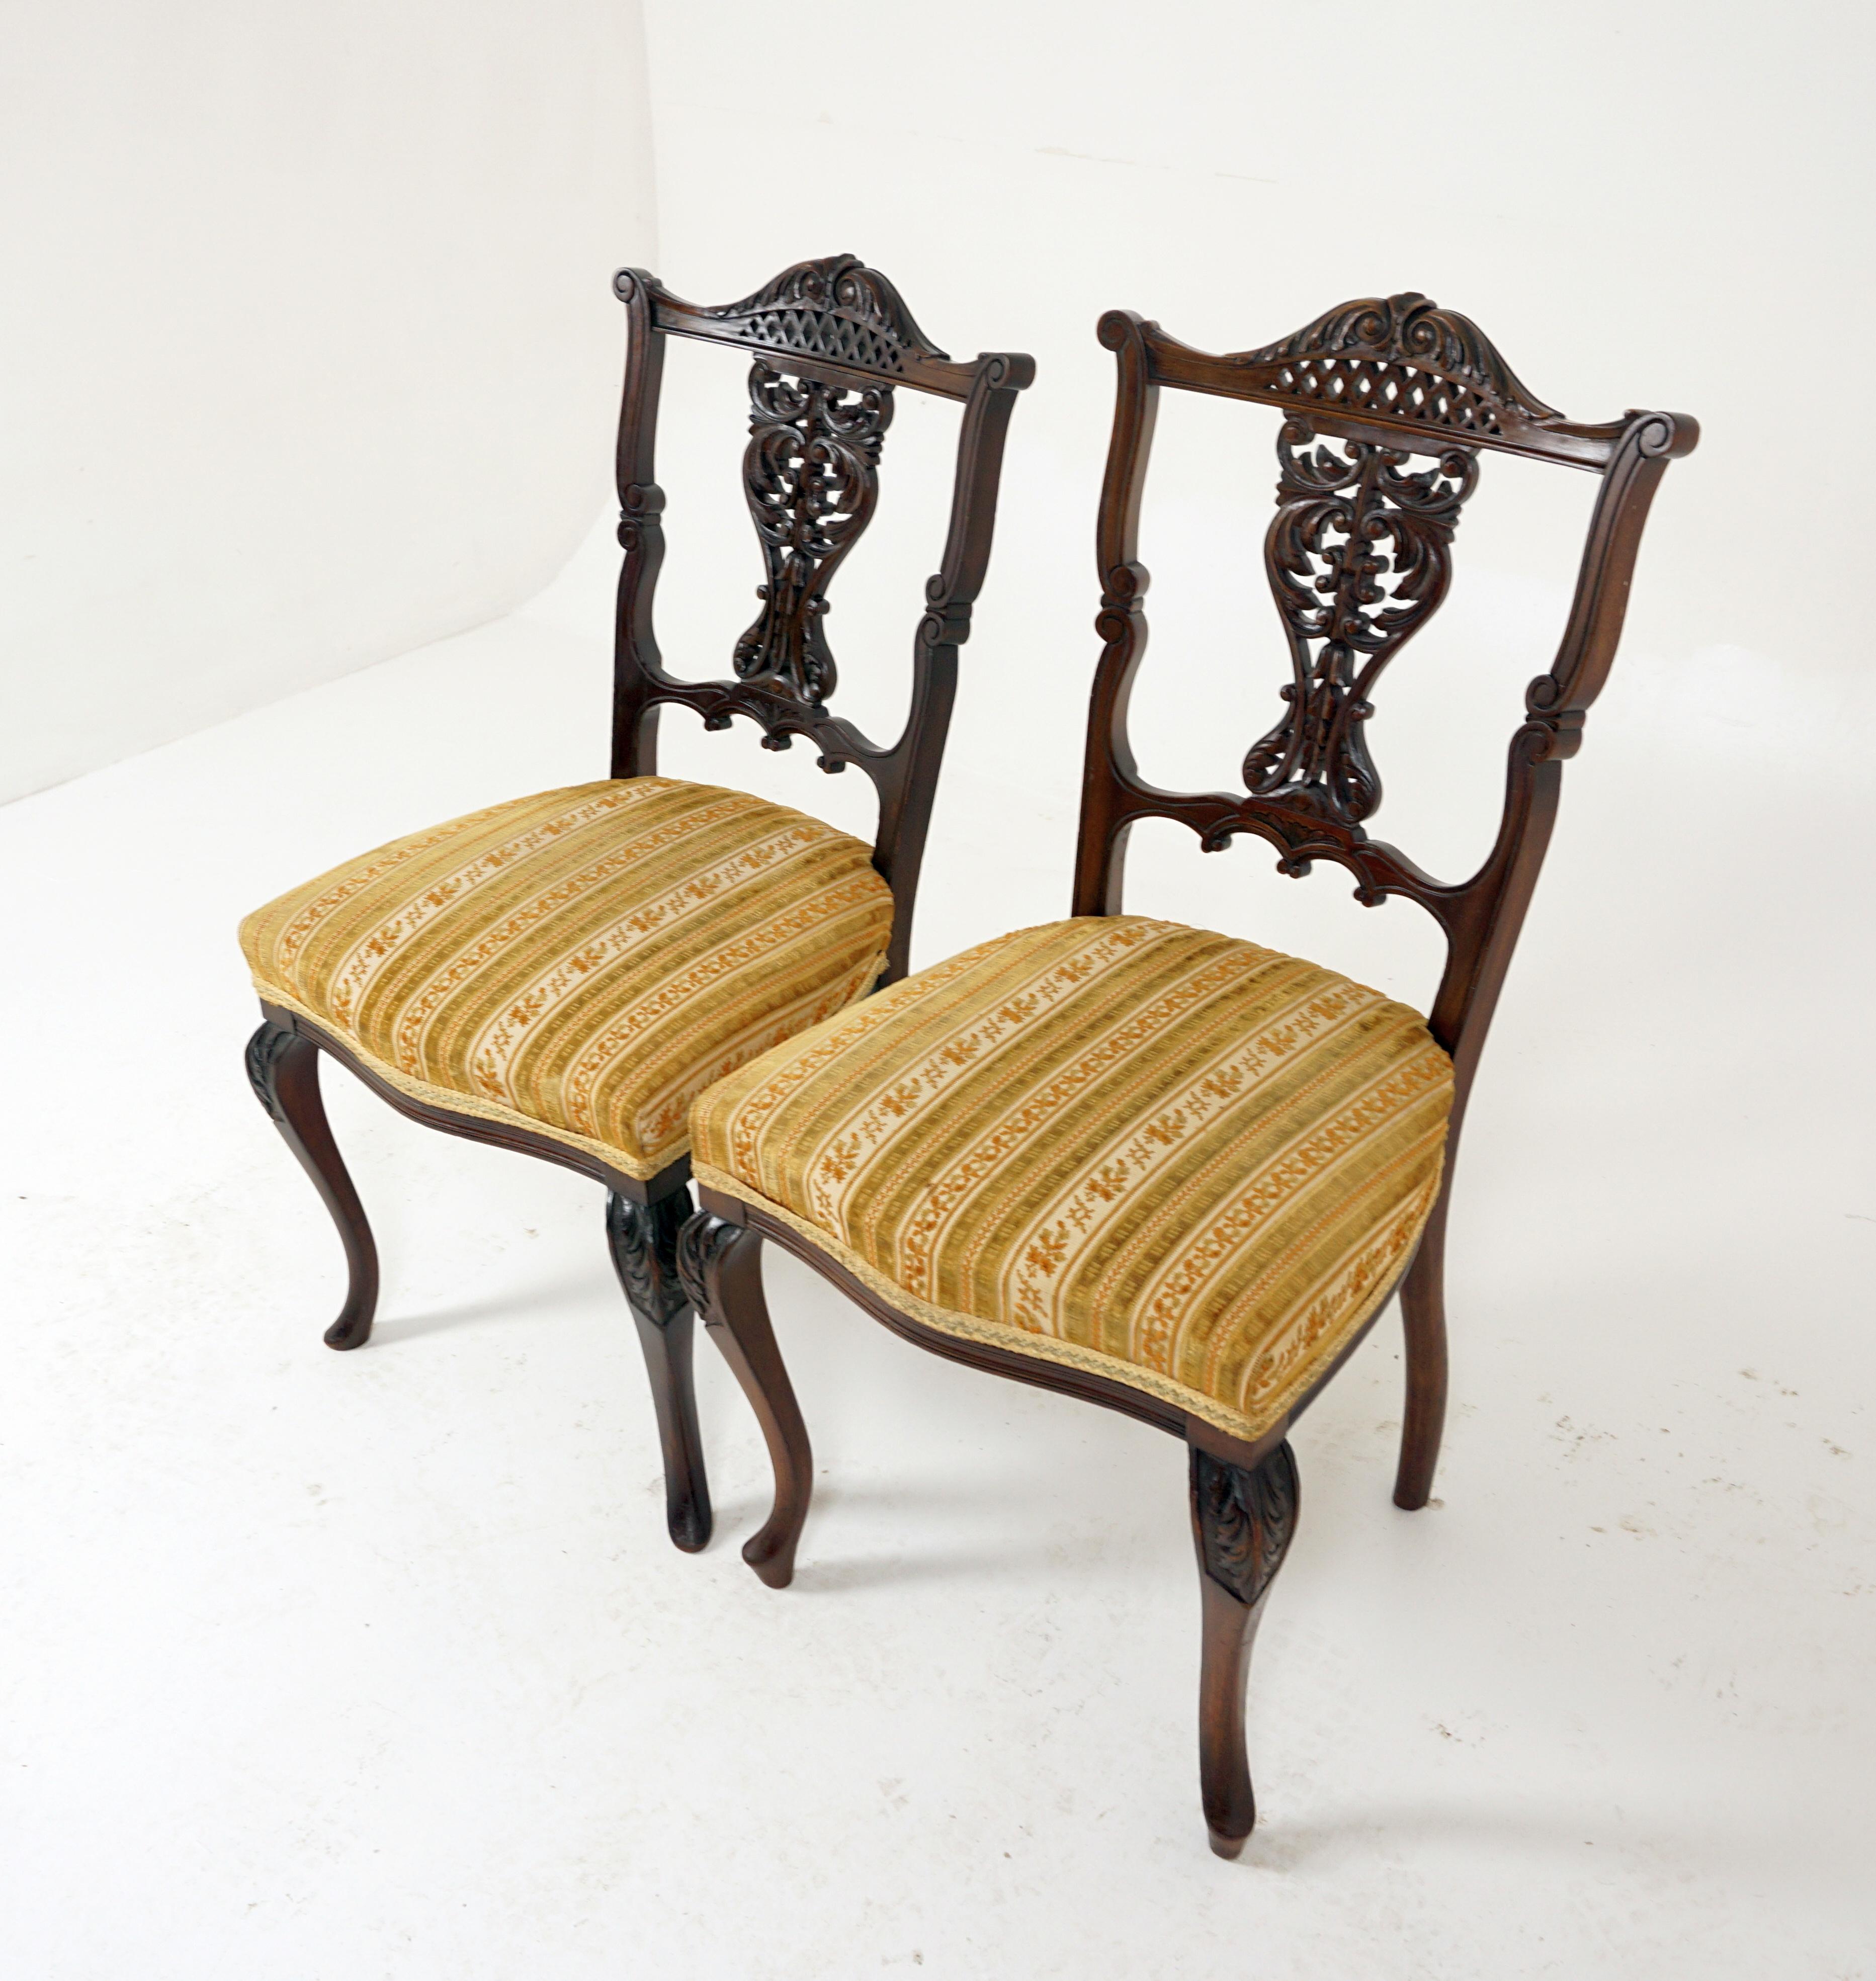 2 Antique Victorian walnut occasional chairs with fretwork 

Scotland 1910
Solid walnut
Original finish
Carved top rail with fret work vertical slat to the back
Upholstered seat with webbing underneath
All standing on a carved cabriolet legs